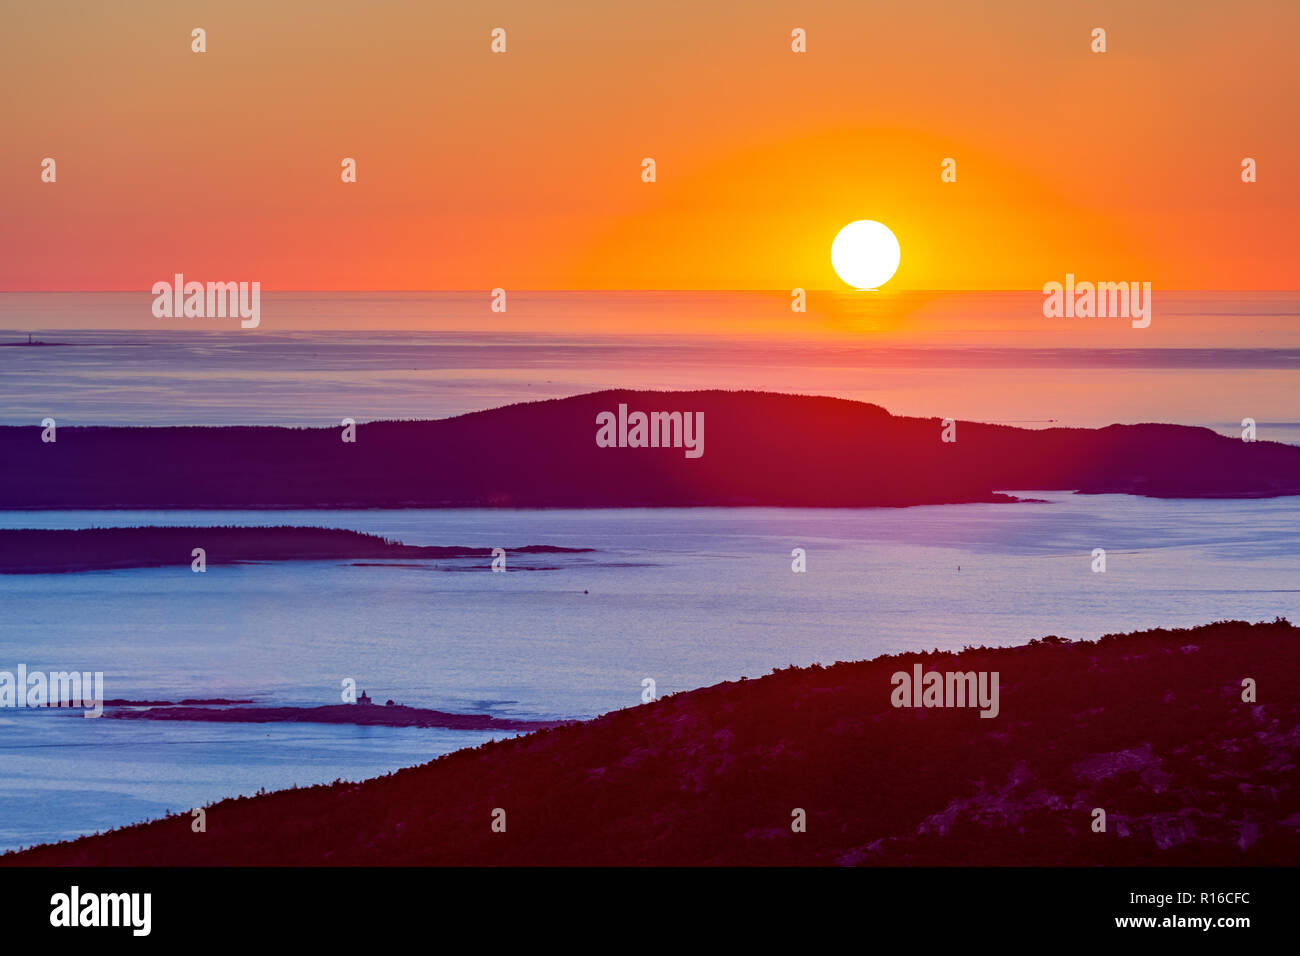 Sunrise in Acadia National Park observed from the top of Cadillac mountain. Stock Photo